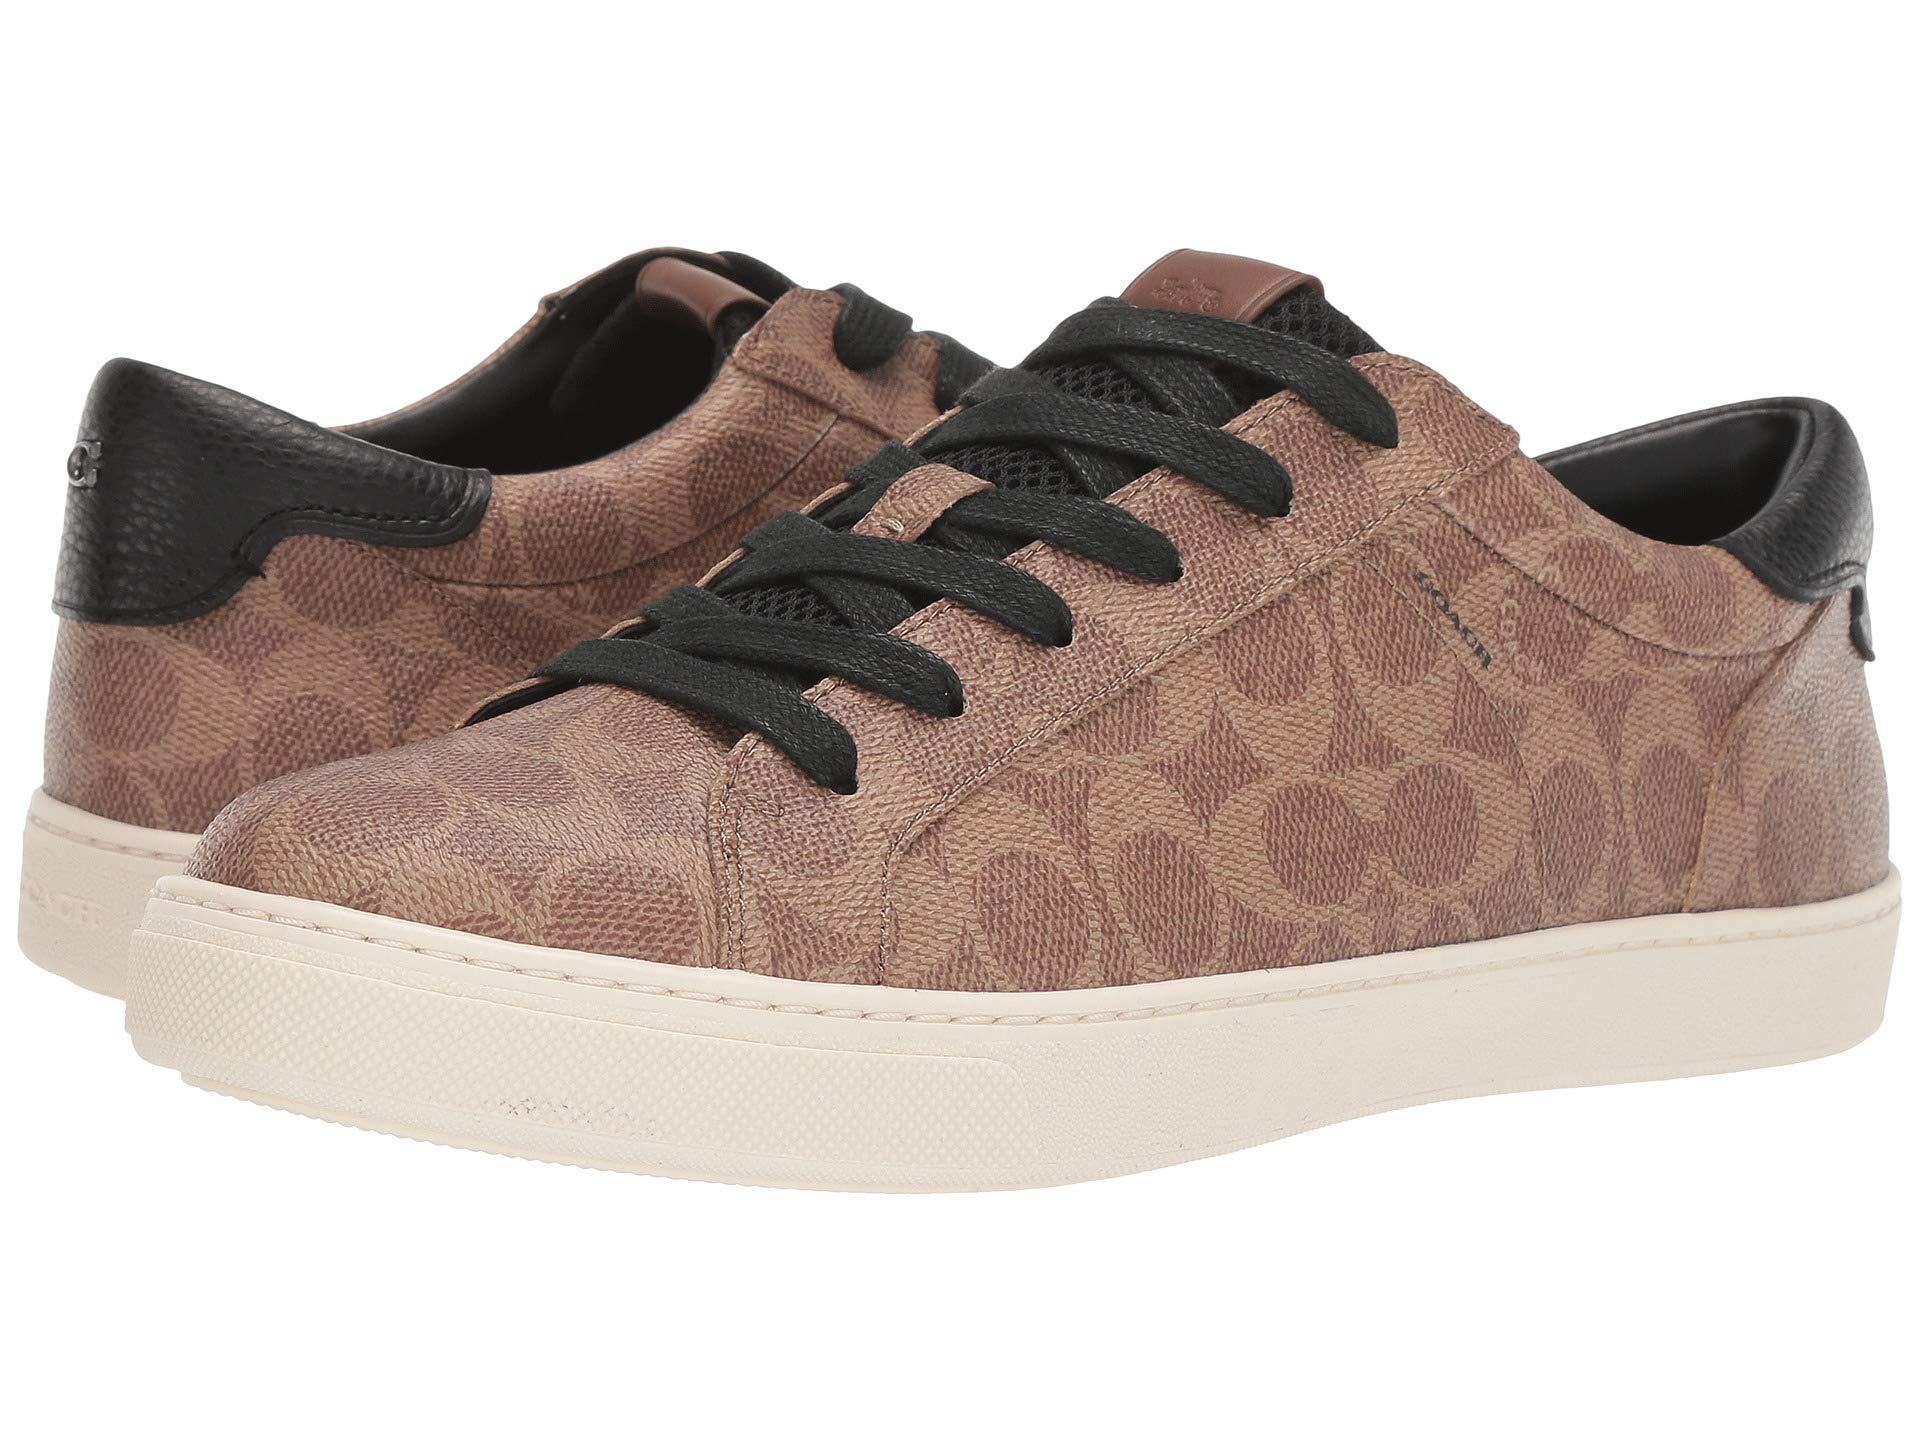 COACH Canvas C126 Signature Low Top Sneaker in Brown for Men - Lyst